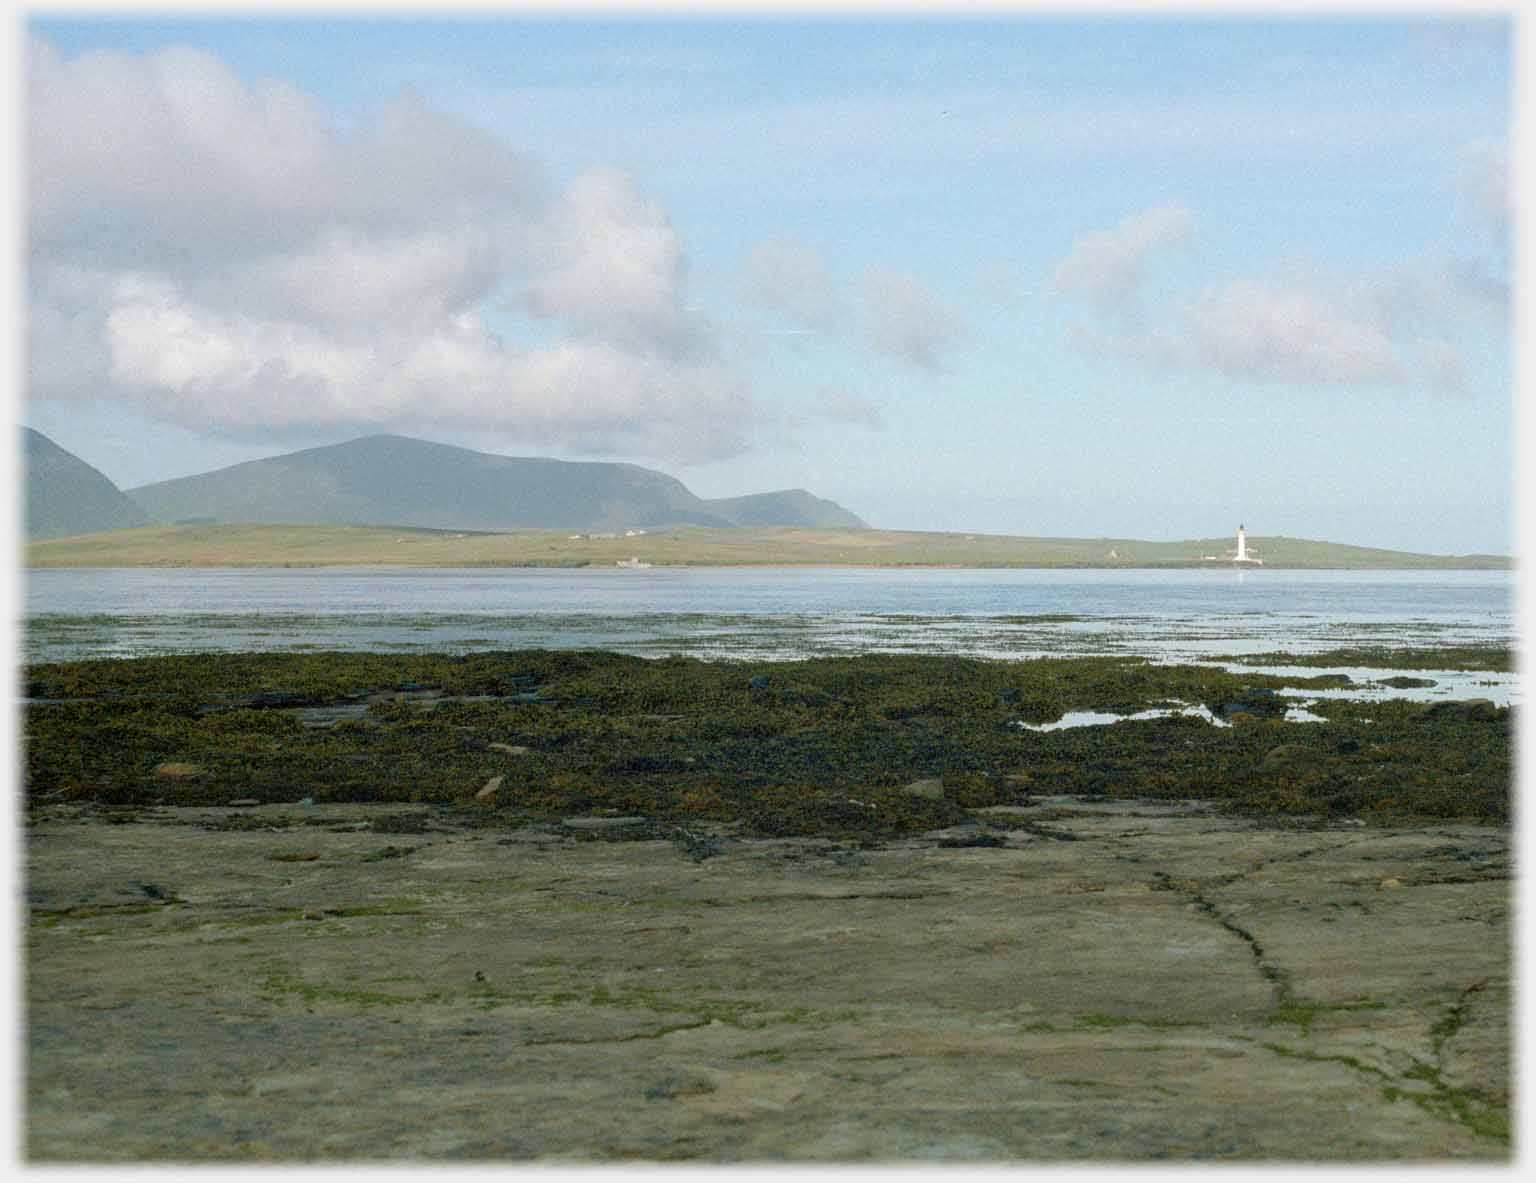 Foreground shore with hills in distance and lighthouse across the water.